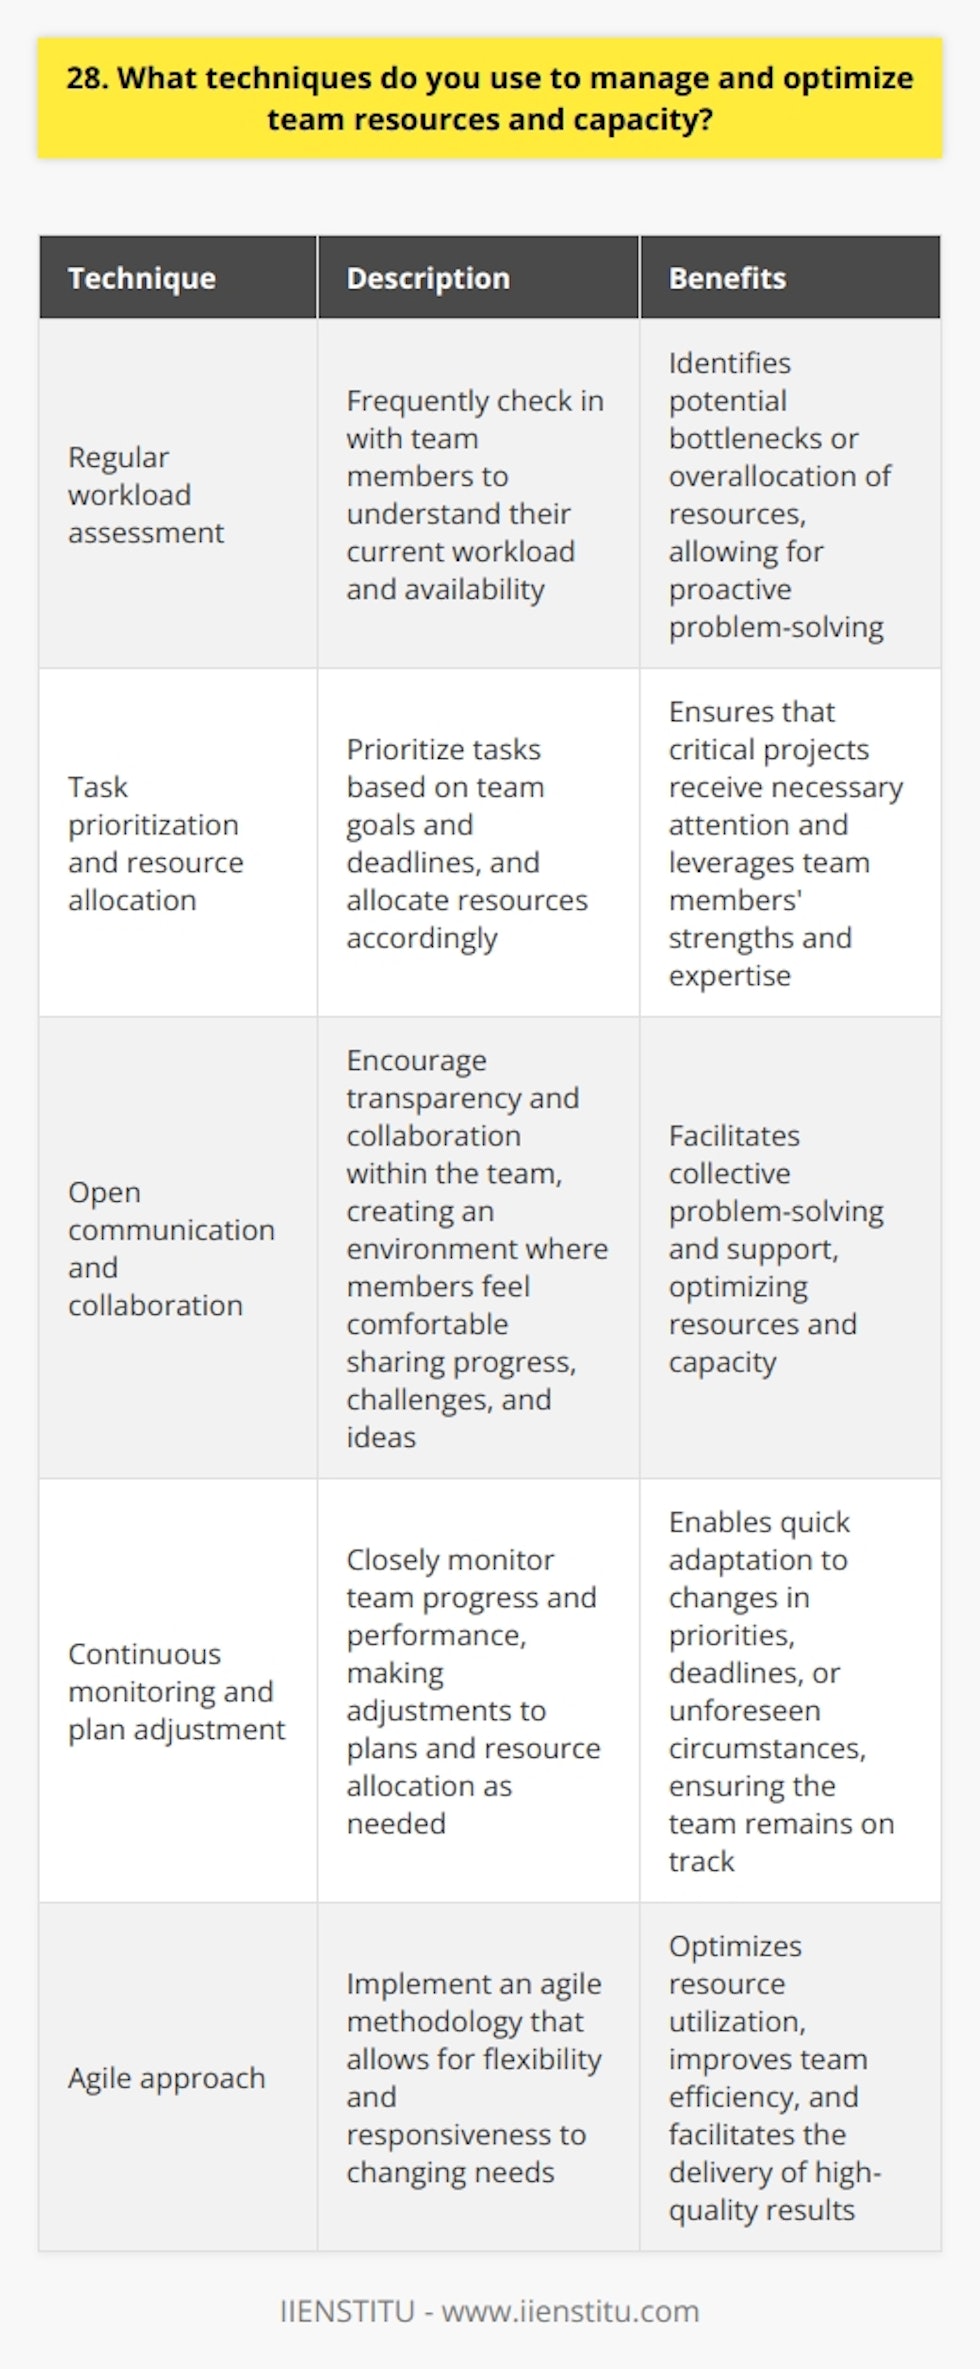 As a team leader, I employ several techniques to effectively manage and optimize team resources and capacity: Regularly assess team workload and capacity I frequently check in with each team member to understand their current workload and availability. This helps me identify any potential bottlenecks or overallocation of resources, allowing me to proactively address these issues. Prioritize tasks and allocate resources accordingly Based on the teams goals and deadlines, I prioritize tasks and allocate resources to ensure that the most critical projects receive the necessary attention. I also consider each team members strengths and expertise when assigning tasks to maximize efficiency and quality of work. Foster open communication and collaboration I encourage open communication within the team, promoting a culture of transparency and collaboration. By creating an environment where team members feel comfortable sharing their progress, challenges, and ideas, we can collectively problem-solve and support each other to optimize our resources and capacity. Continuously monitor and adjust plans I closely monitor the teams progress and performance, making adjustments to our plans and resource allocation as needed. This agile approach allows us to quickly adapt to changes in priorities, deadlines, or unforeseen circumstances, ensuring that we remain on track and deliver high-quality results. By implementing these techniques, I have successfully led teams to optimize their resources and capacity, ultimately achieving our goals and delivering exceptional results.